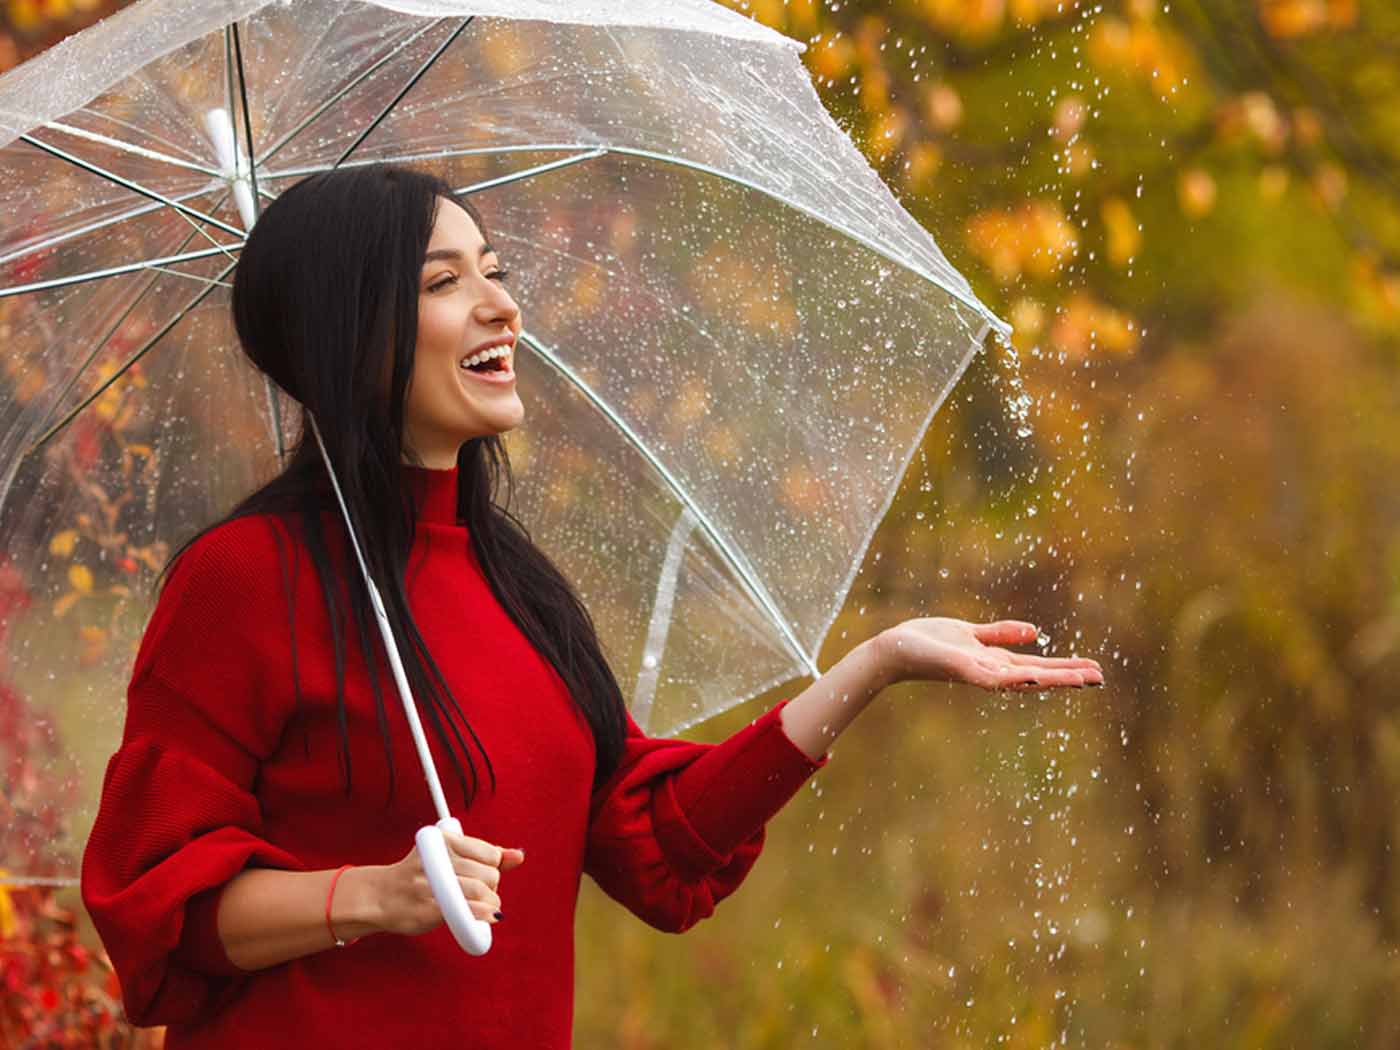 How to take care of skin during monsoon